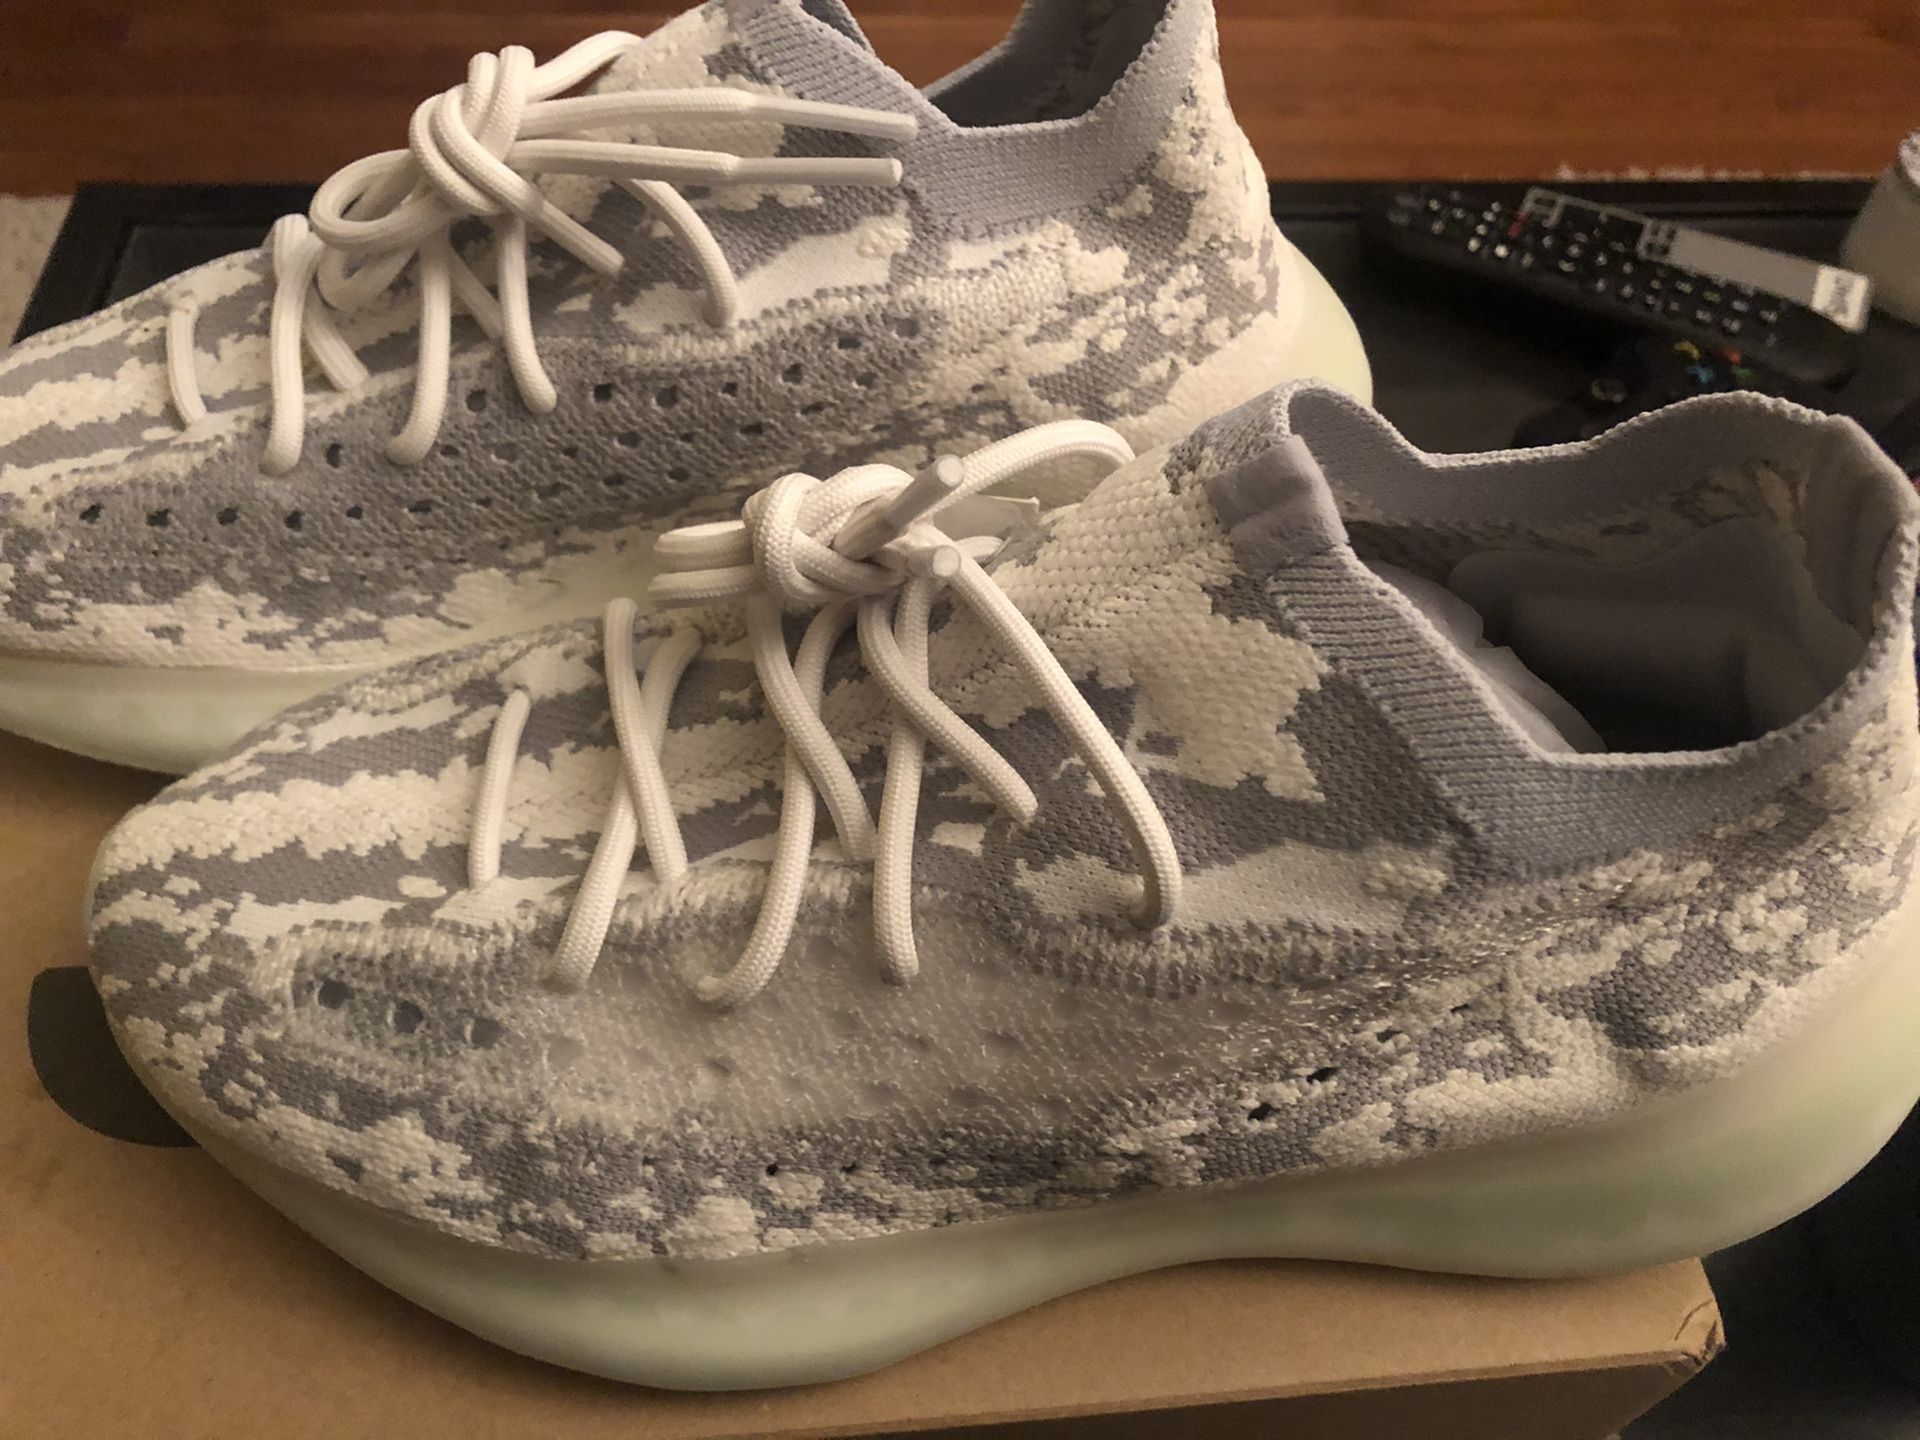 NEED to sell ASAP! Authentic Adidas Yeezy Alien 380 9.5!